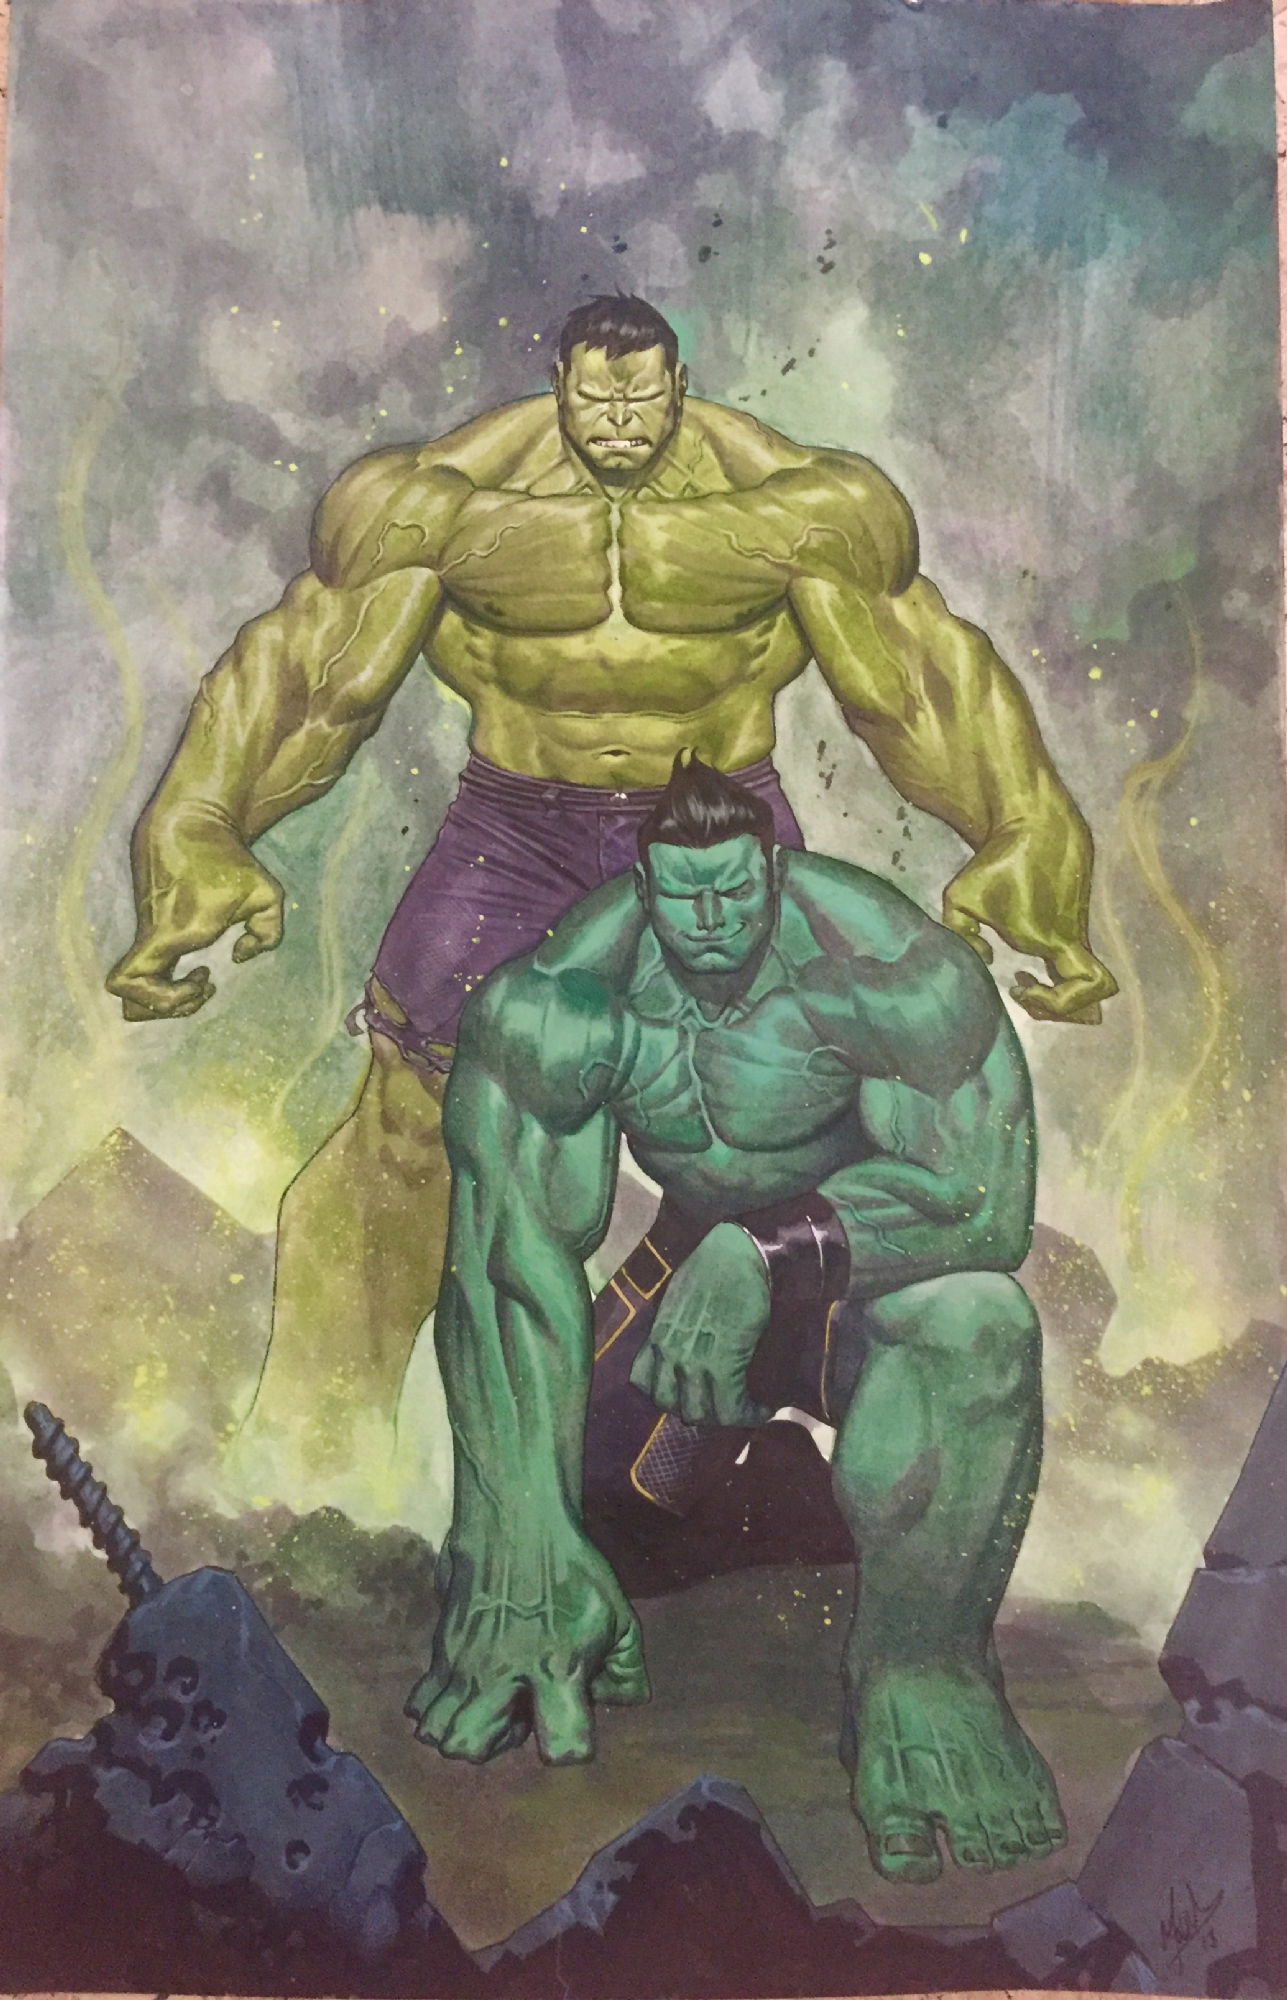 Marvel Generations : Totally Awesome Hulk / Banner Hulk The